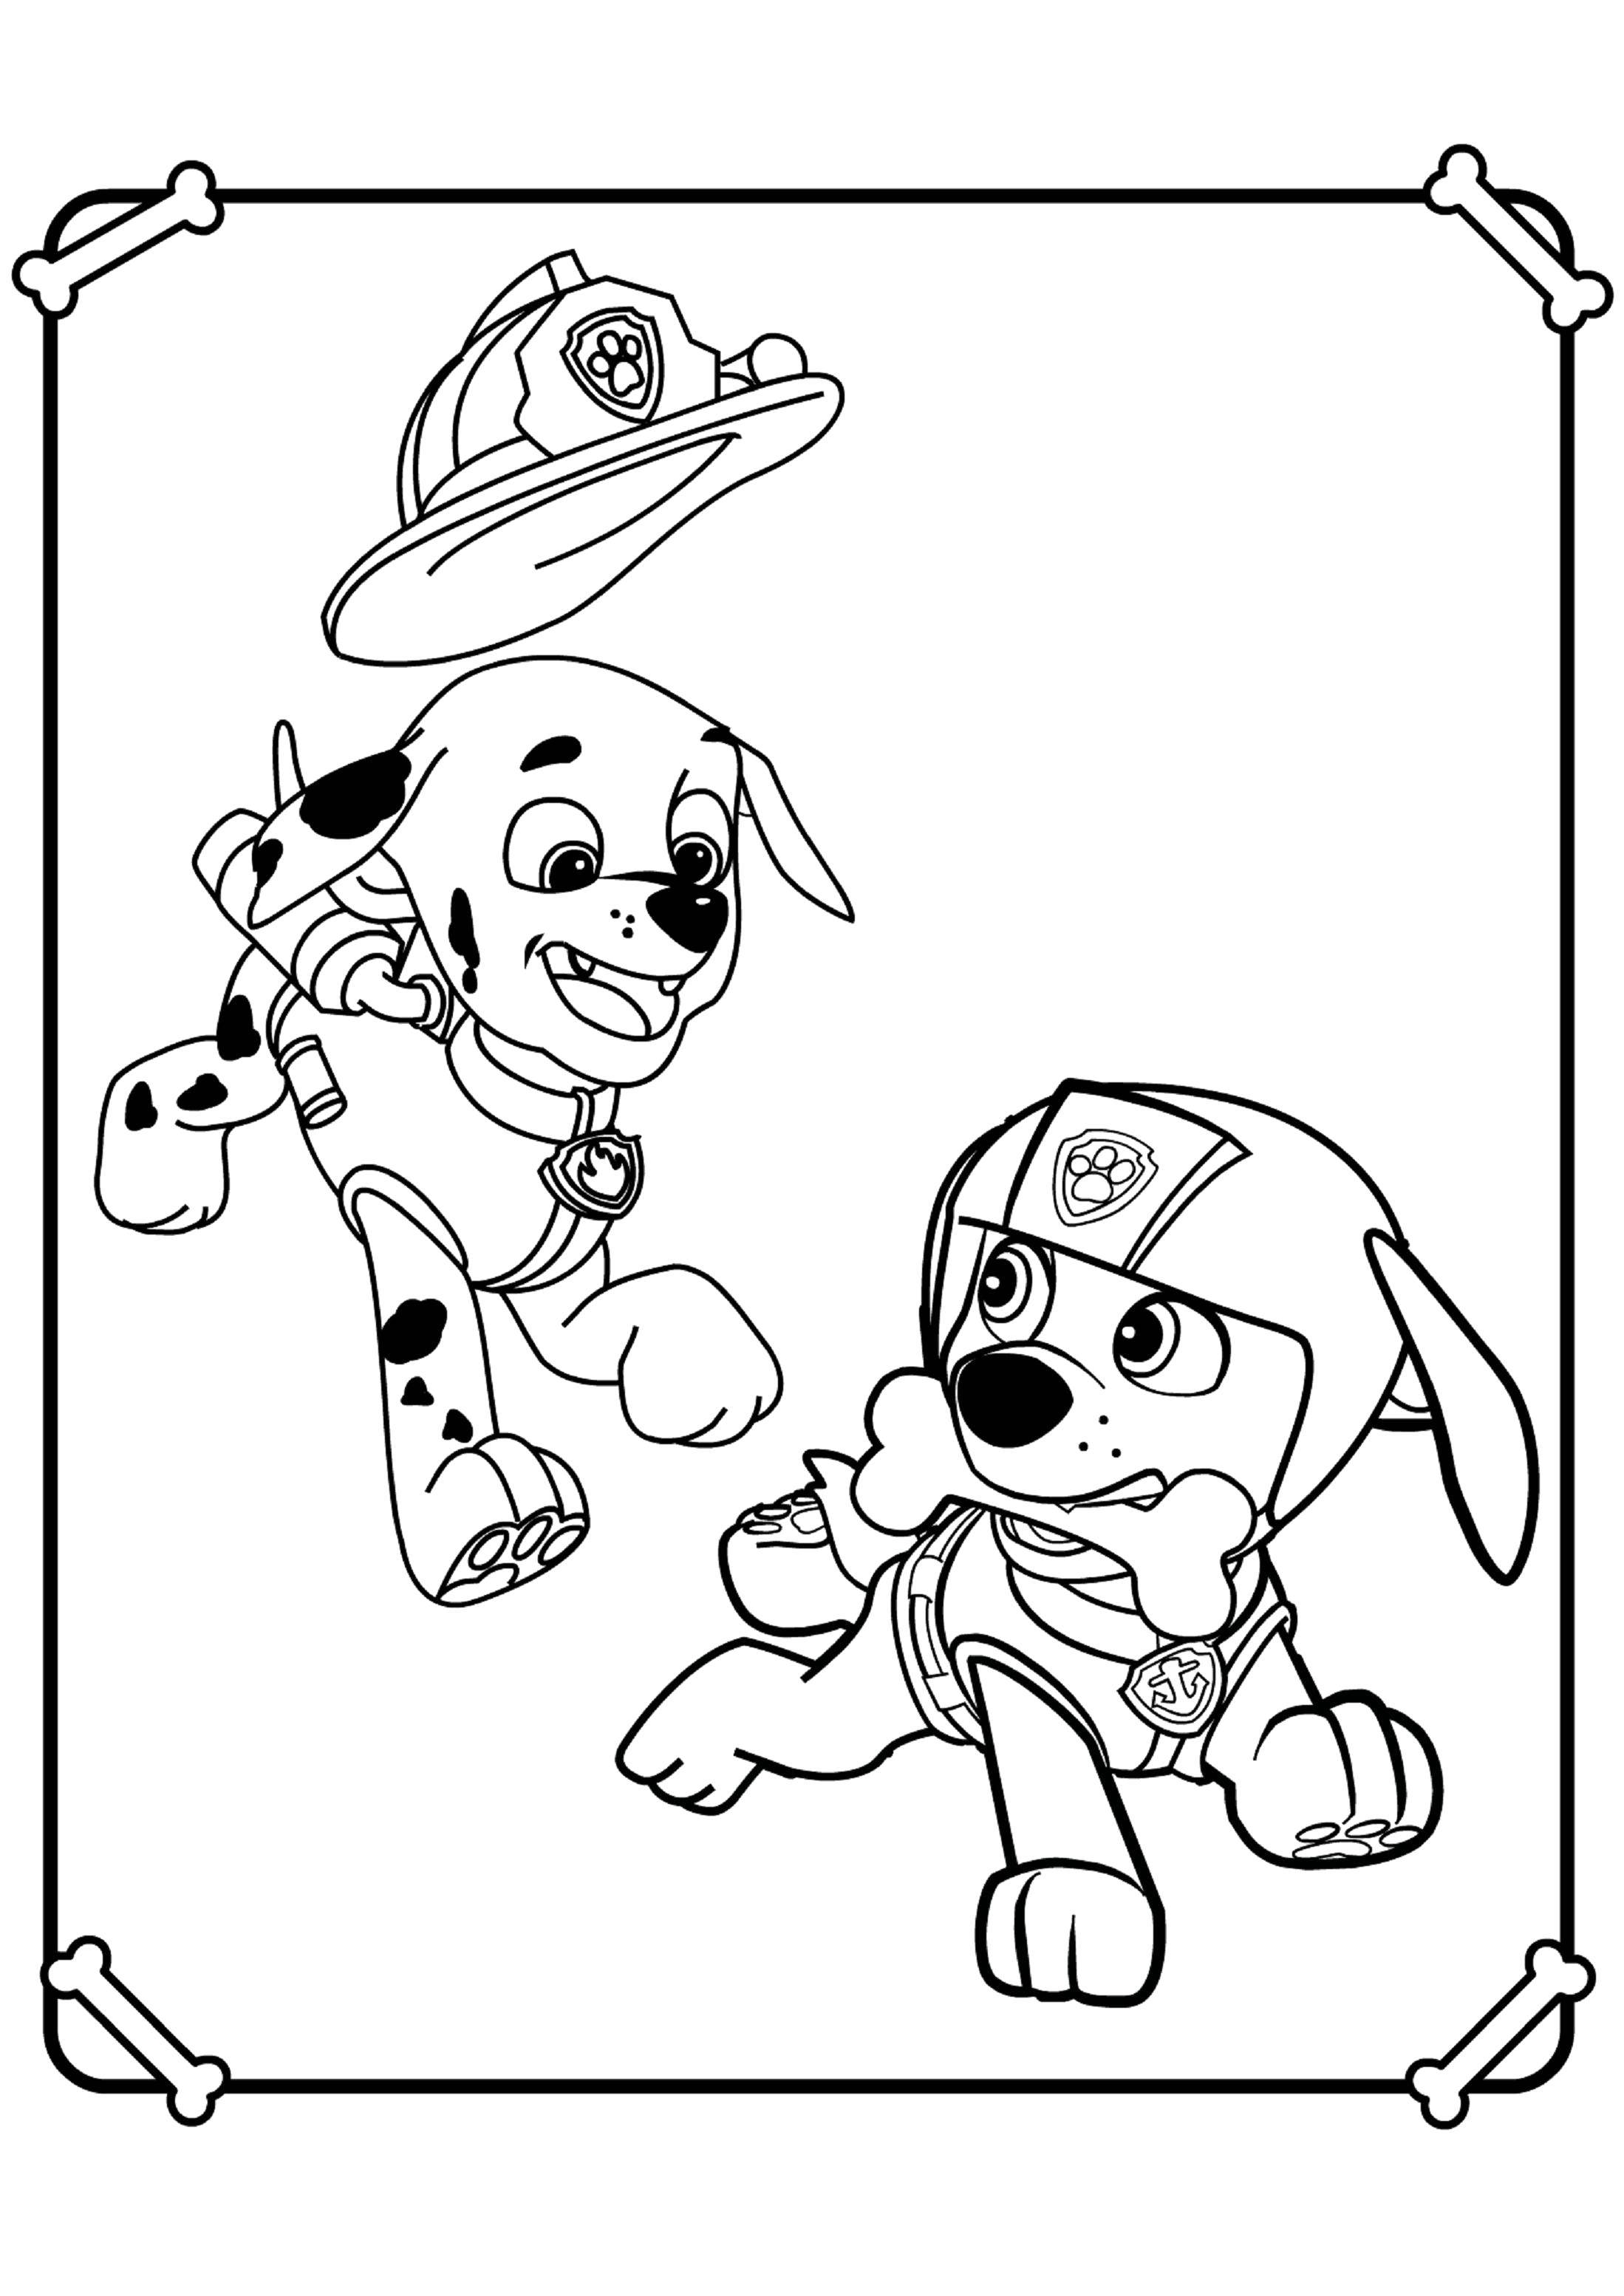 Coloring Chase and Marshal. Category paw patrol. Tags:  Paw patrol.